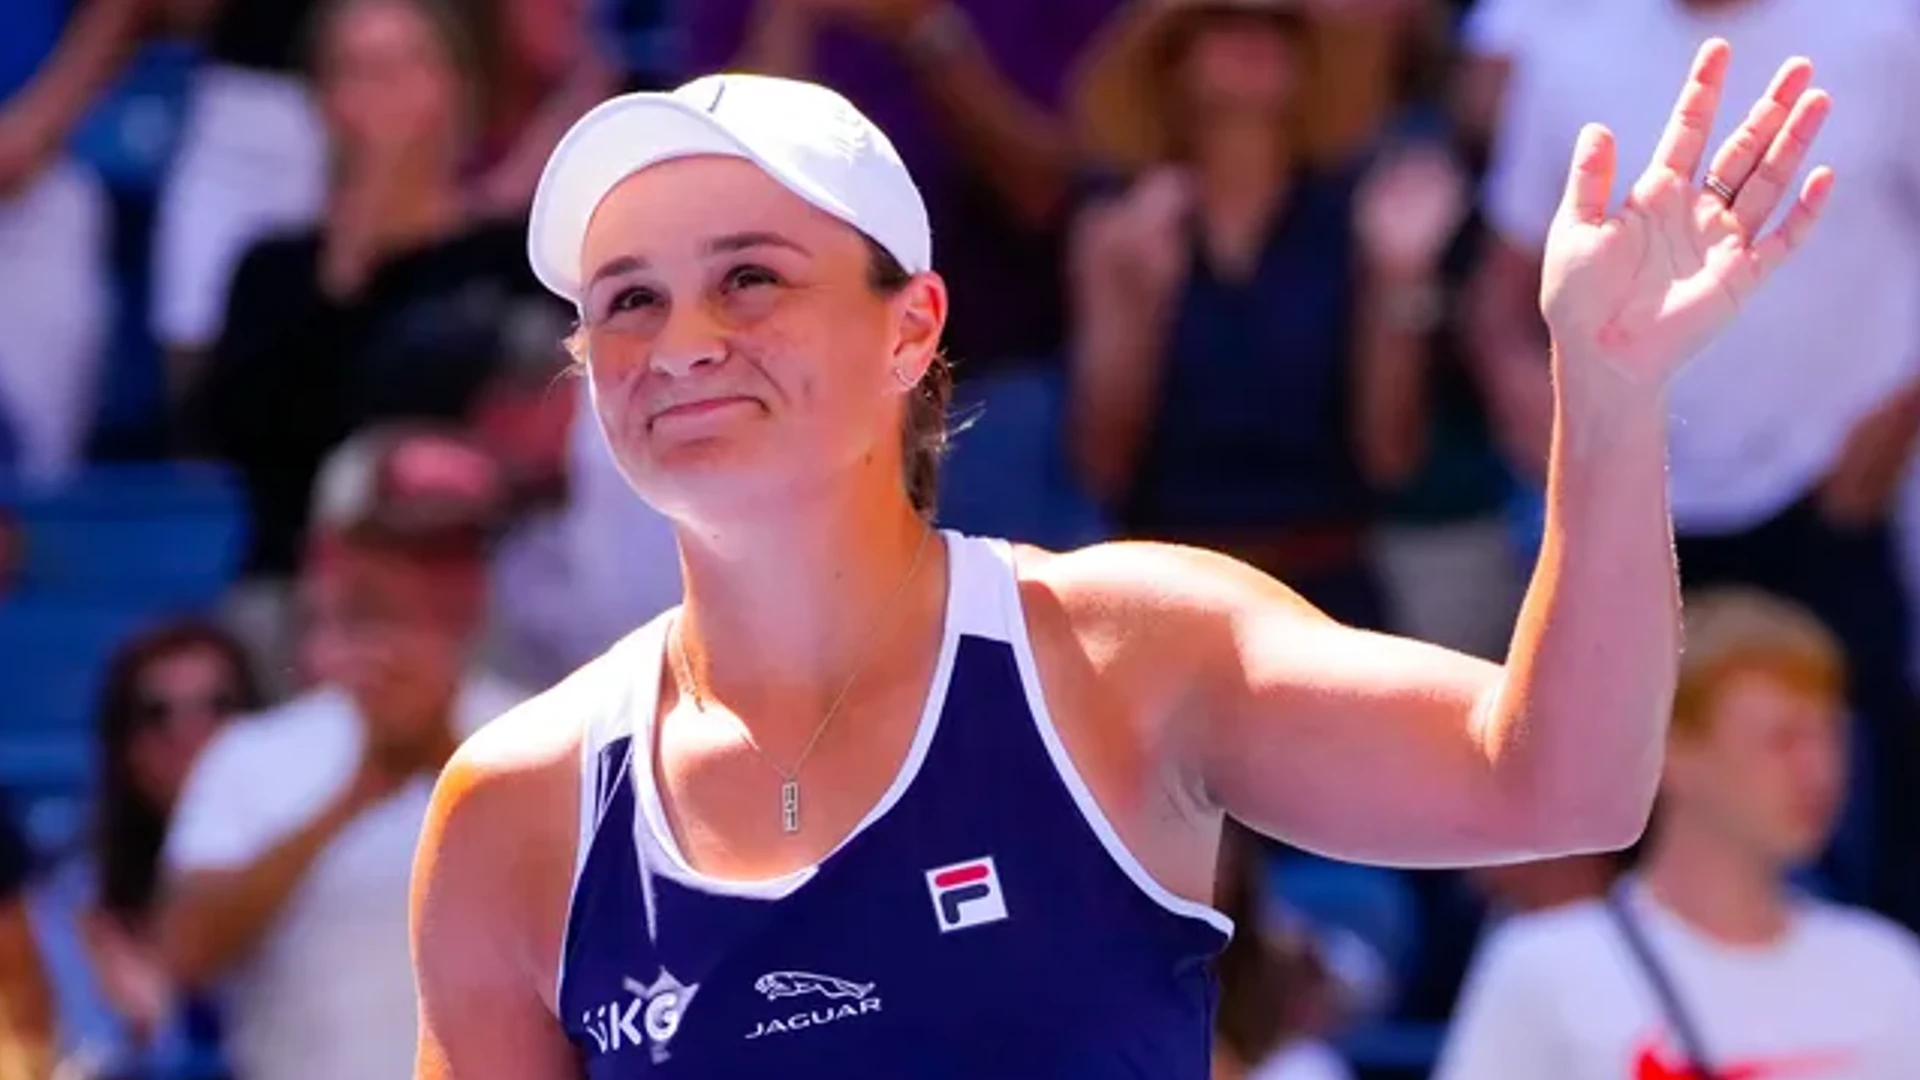 World No. 1 Ash Barty declares retirement from tennis aged 25